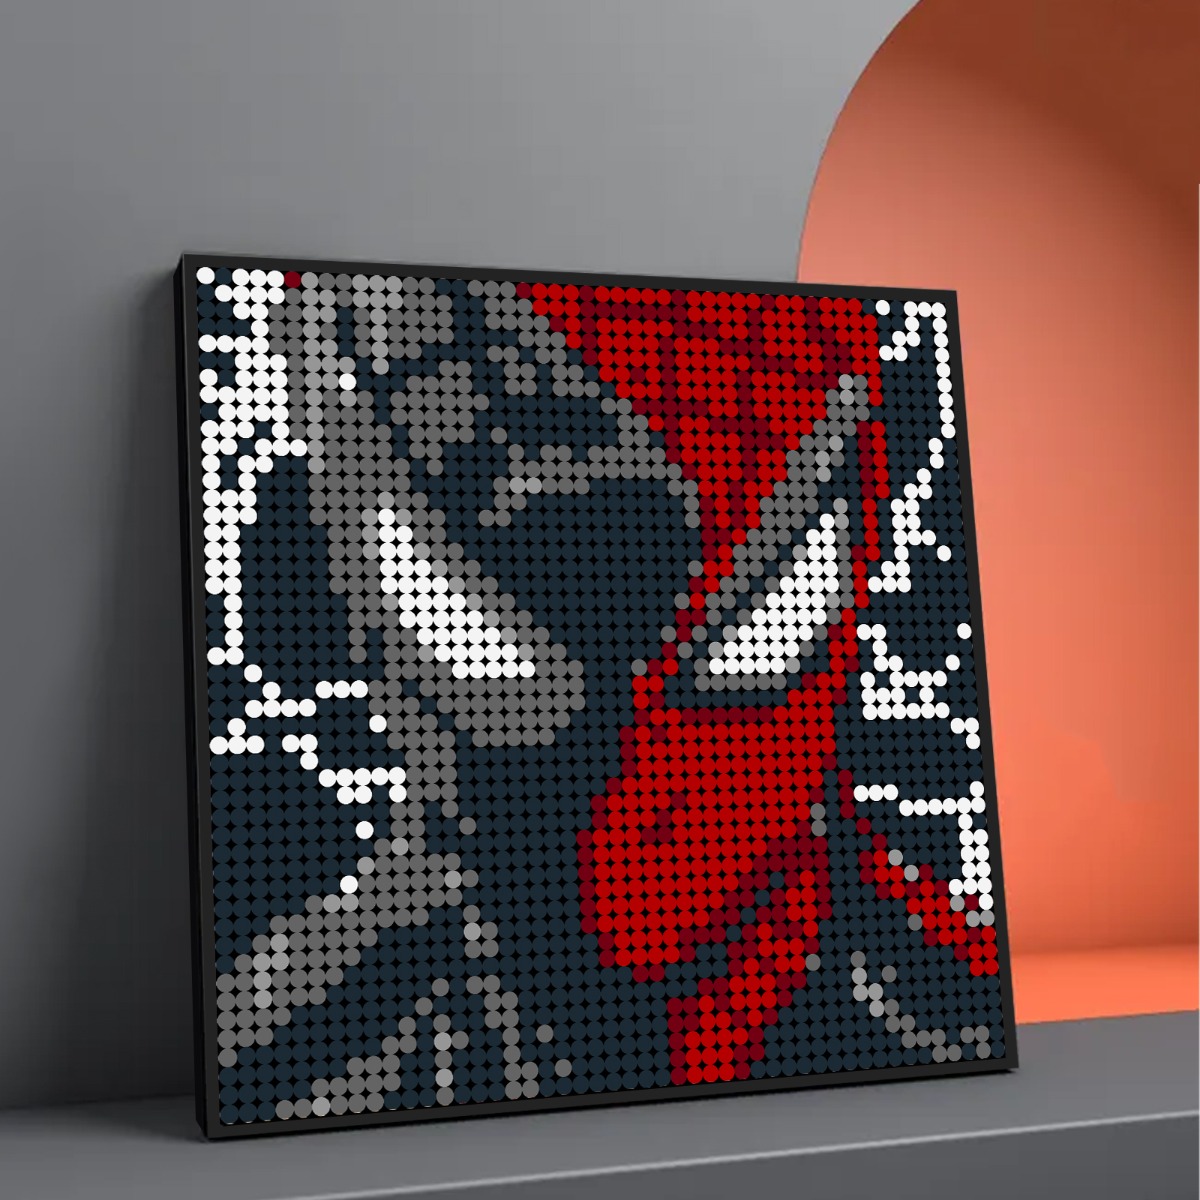 moc 90149 spiderman in black and red pixel art movie moc factory 035435 - LEPIN Germany